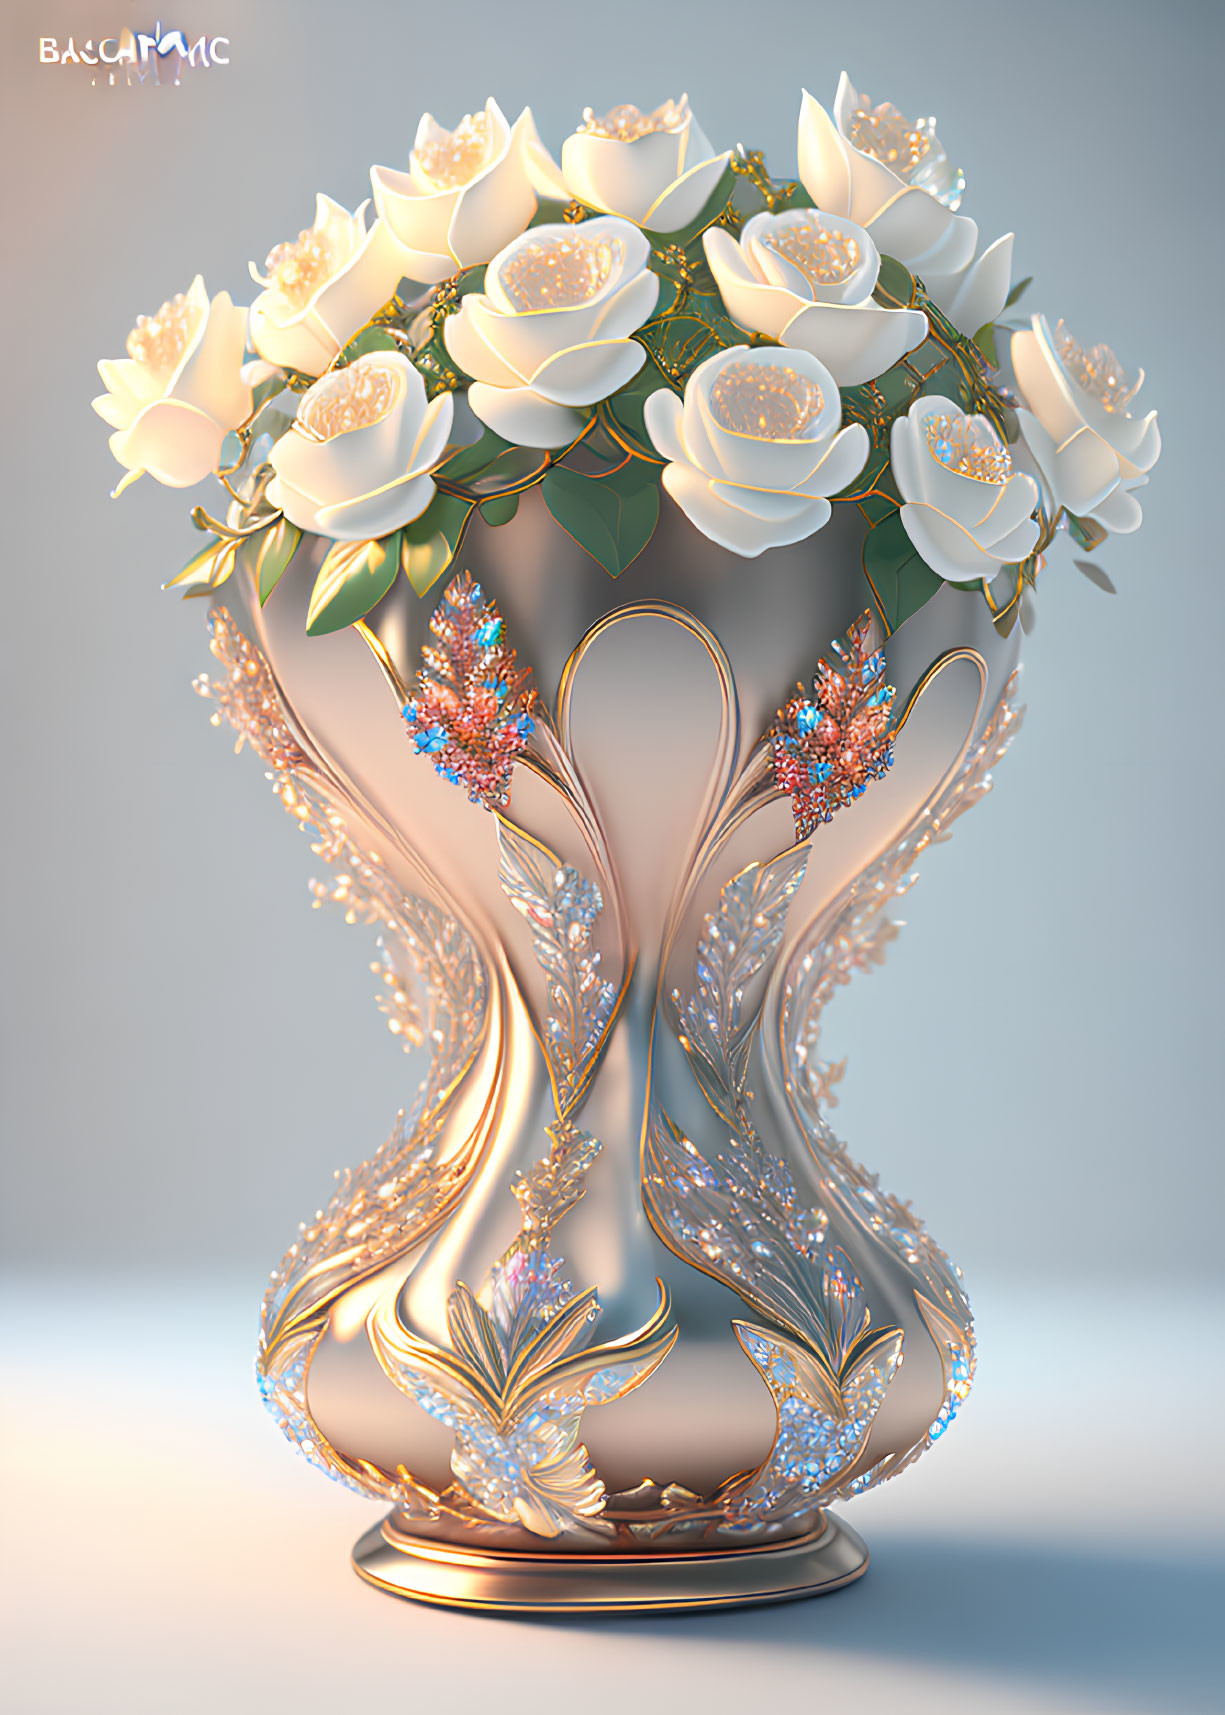 Ornate decorative vase with white flowers and jeweled branches